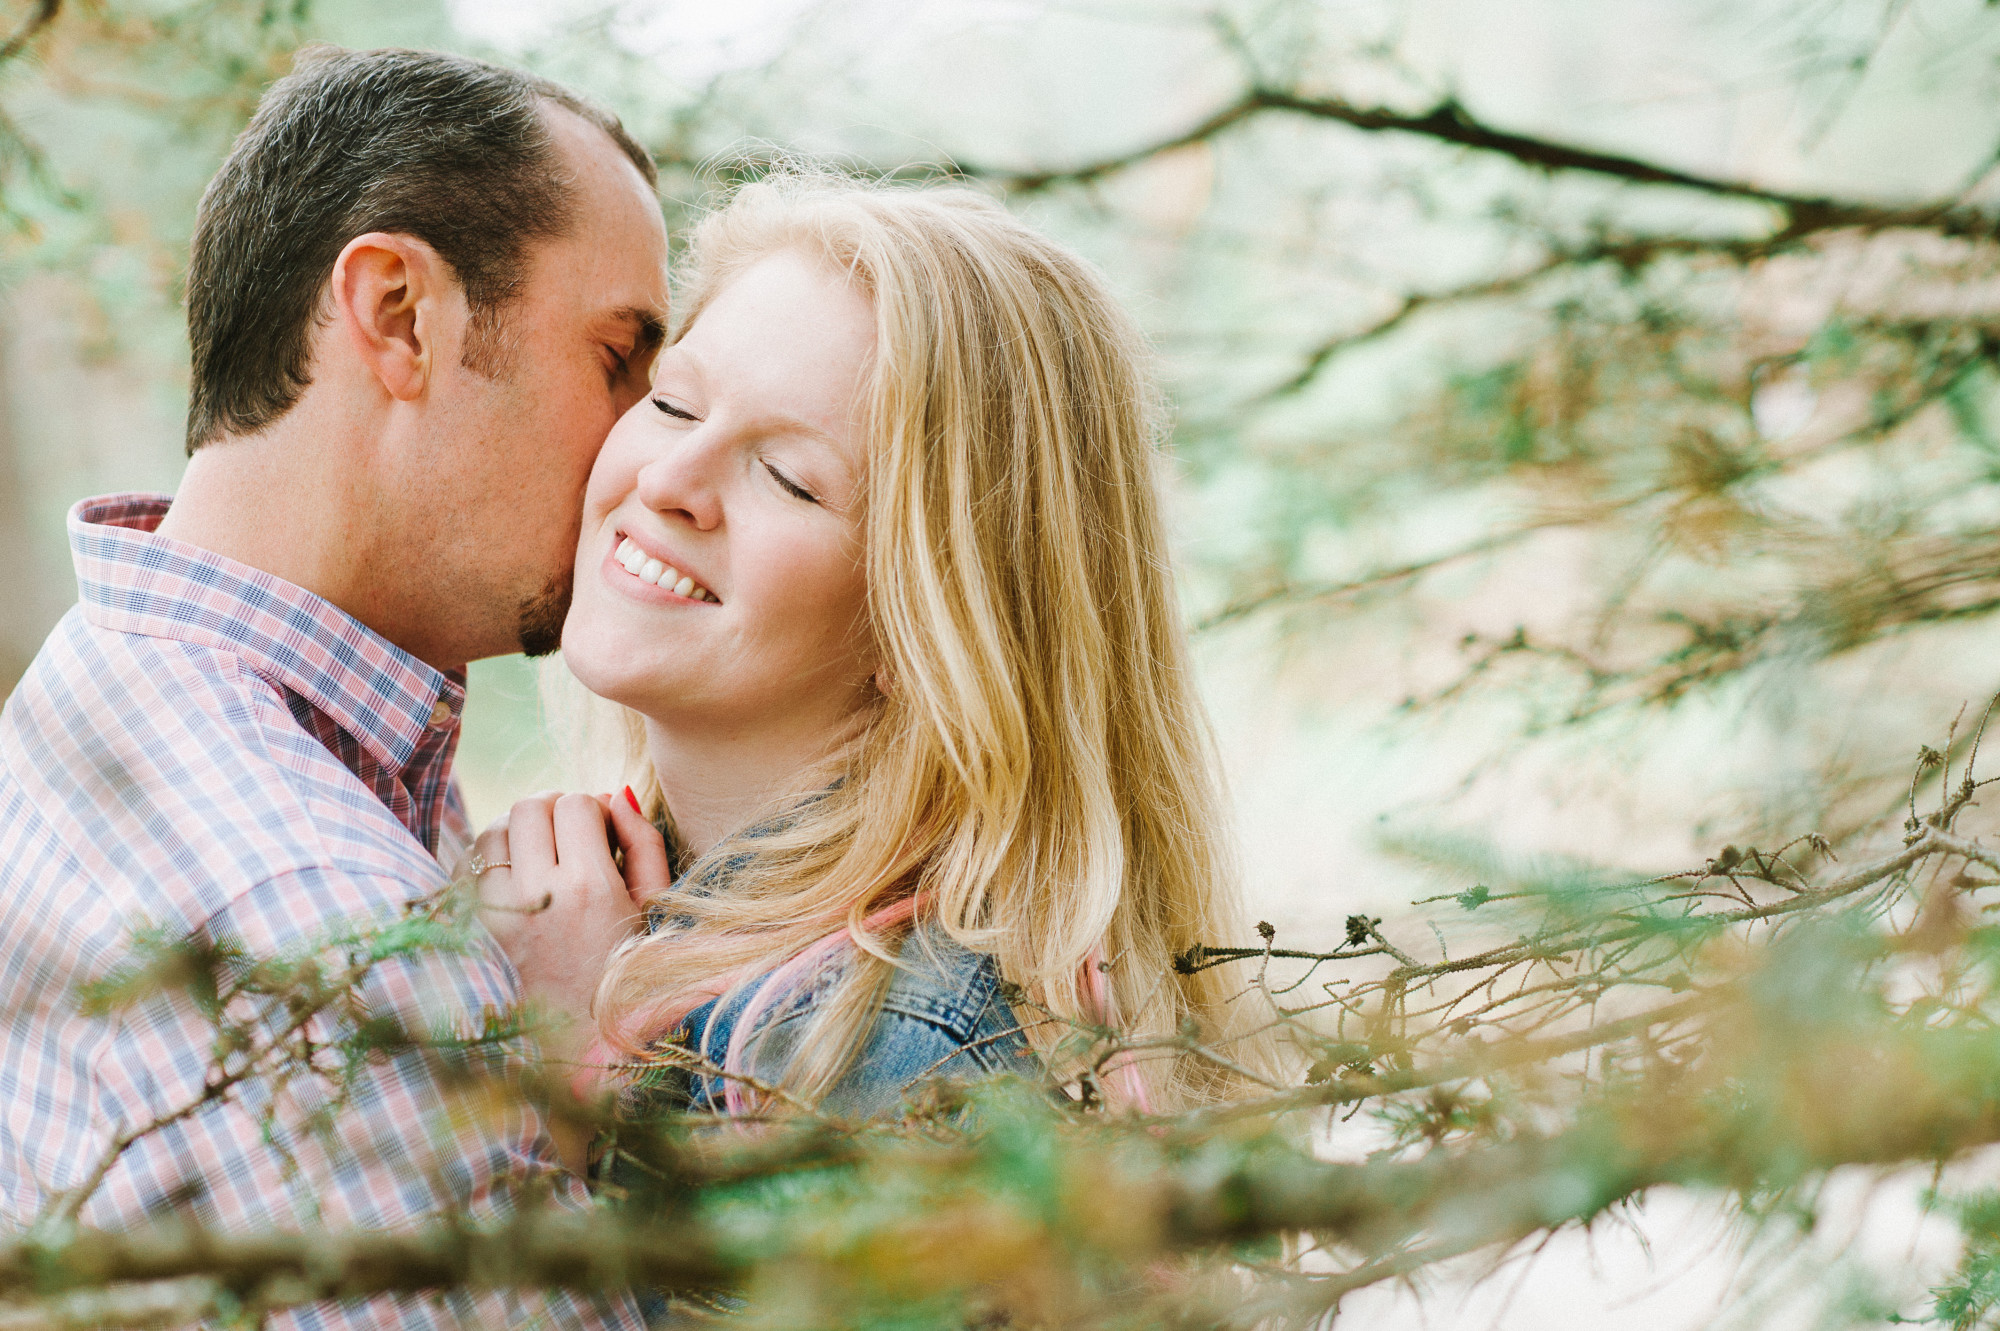 Duluth Engagement Session